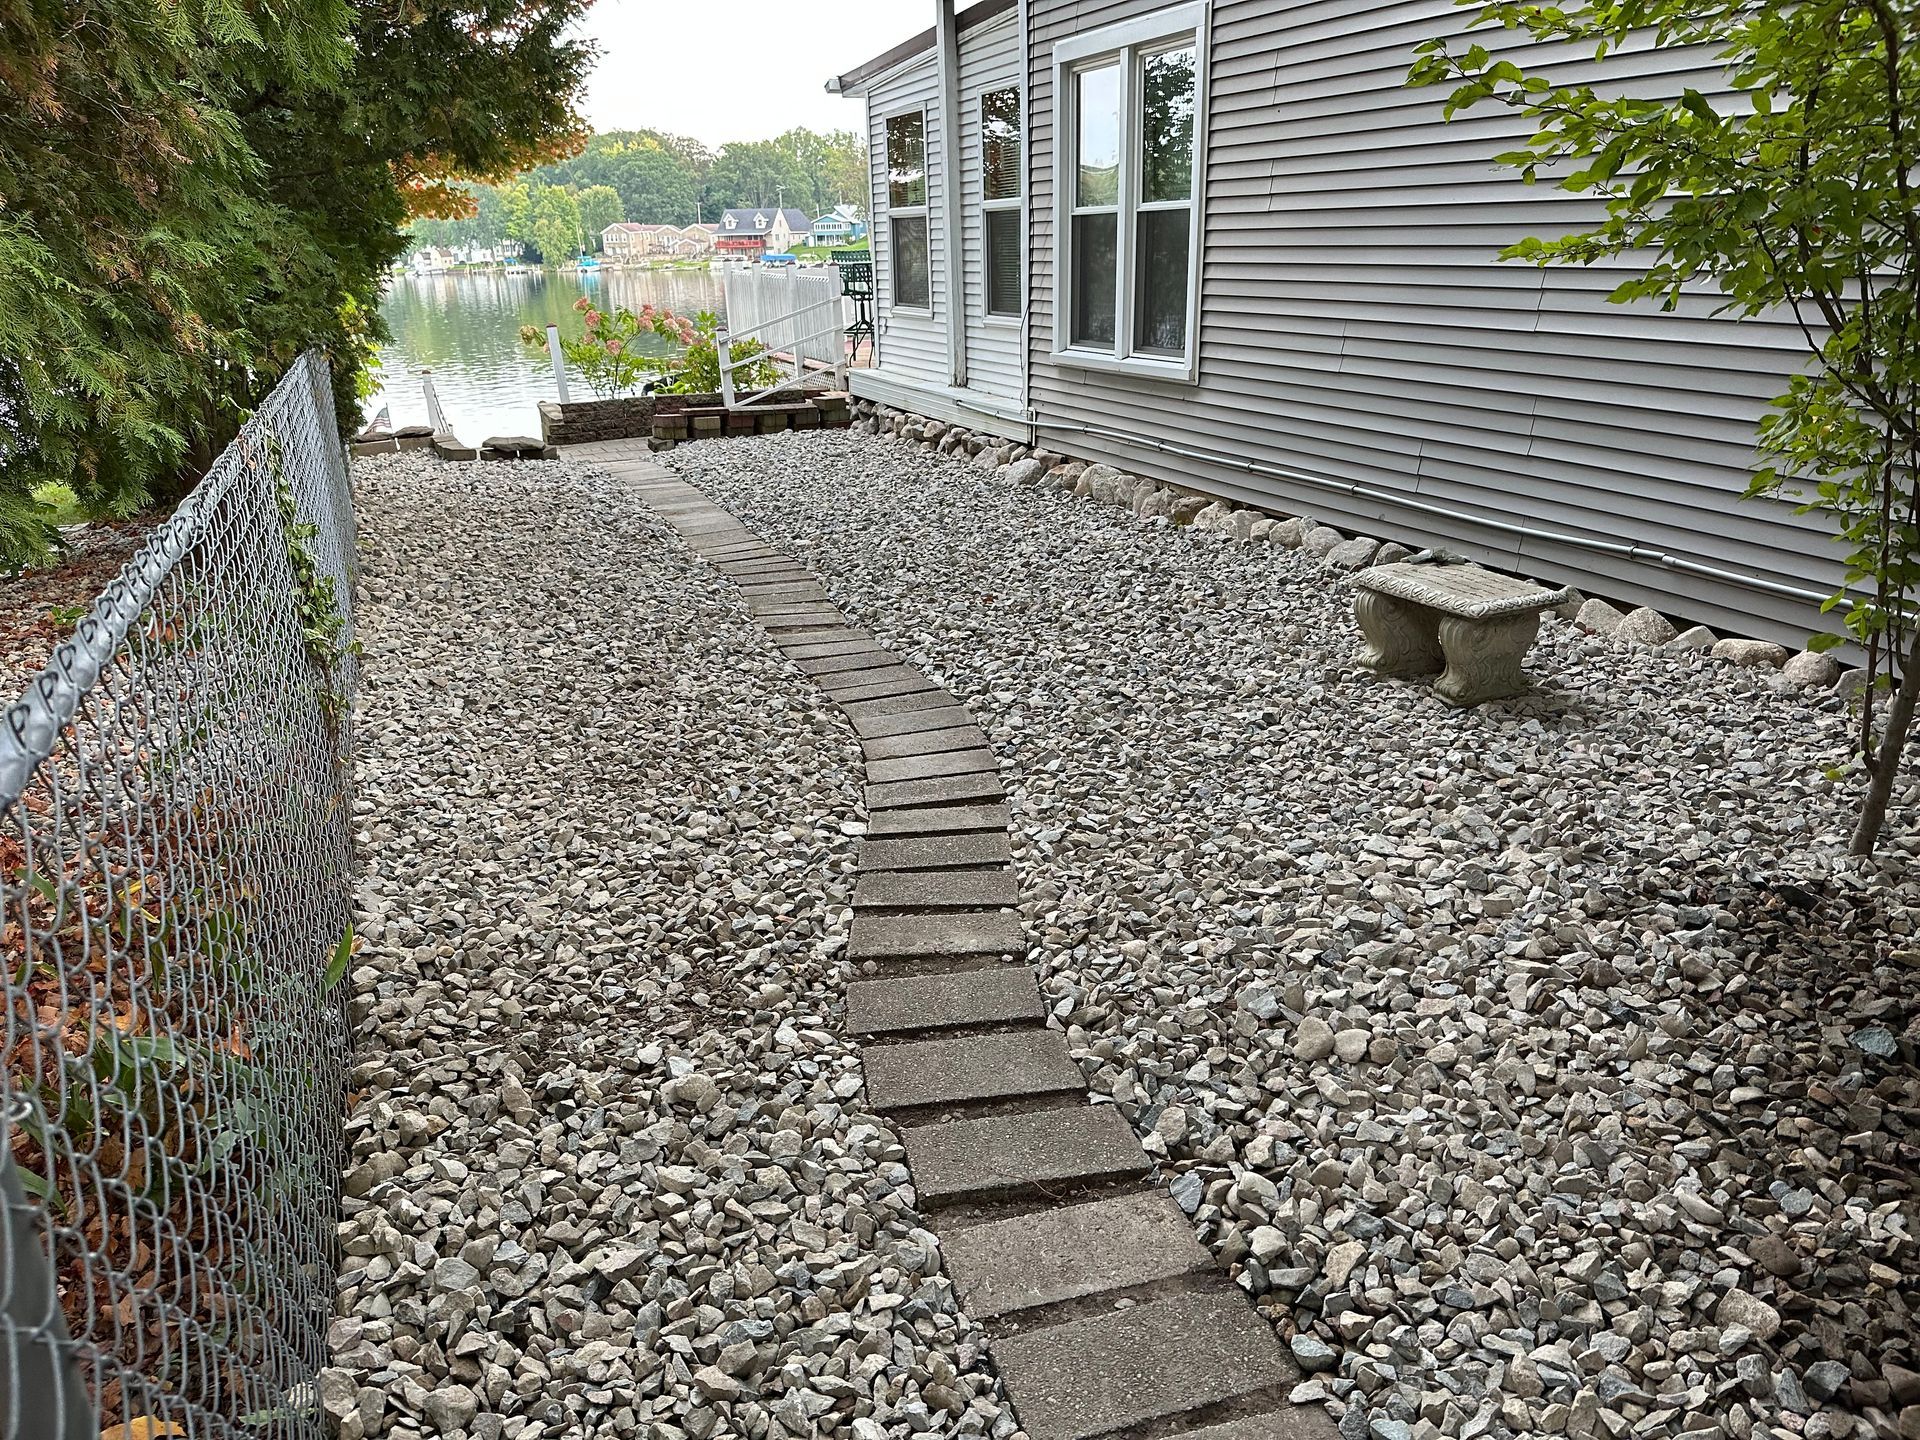 a path leading to a house surrounded by rocks and a chain link fence .